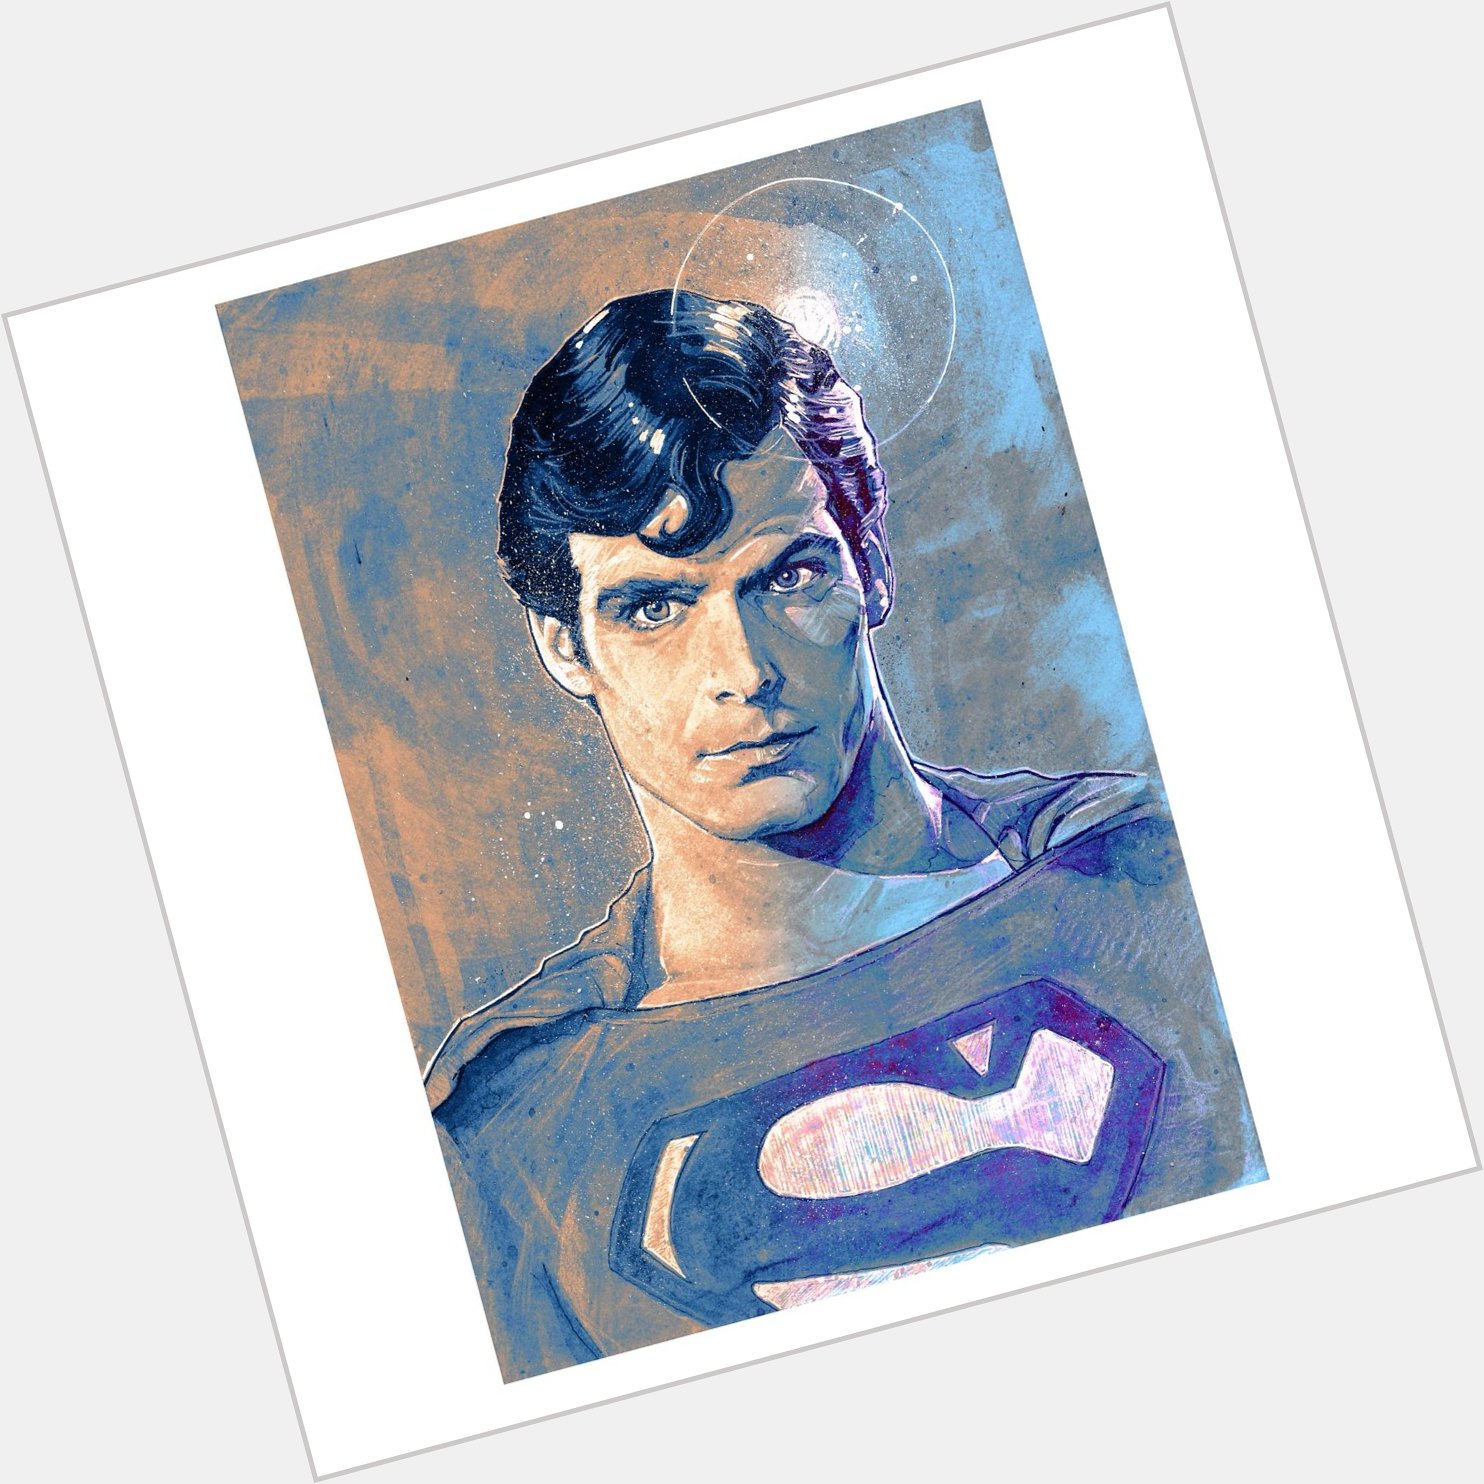 Happy Birthday to Christopher Reeve, born September 25th 1952.   